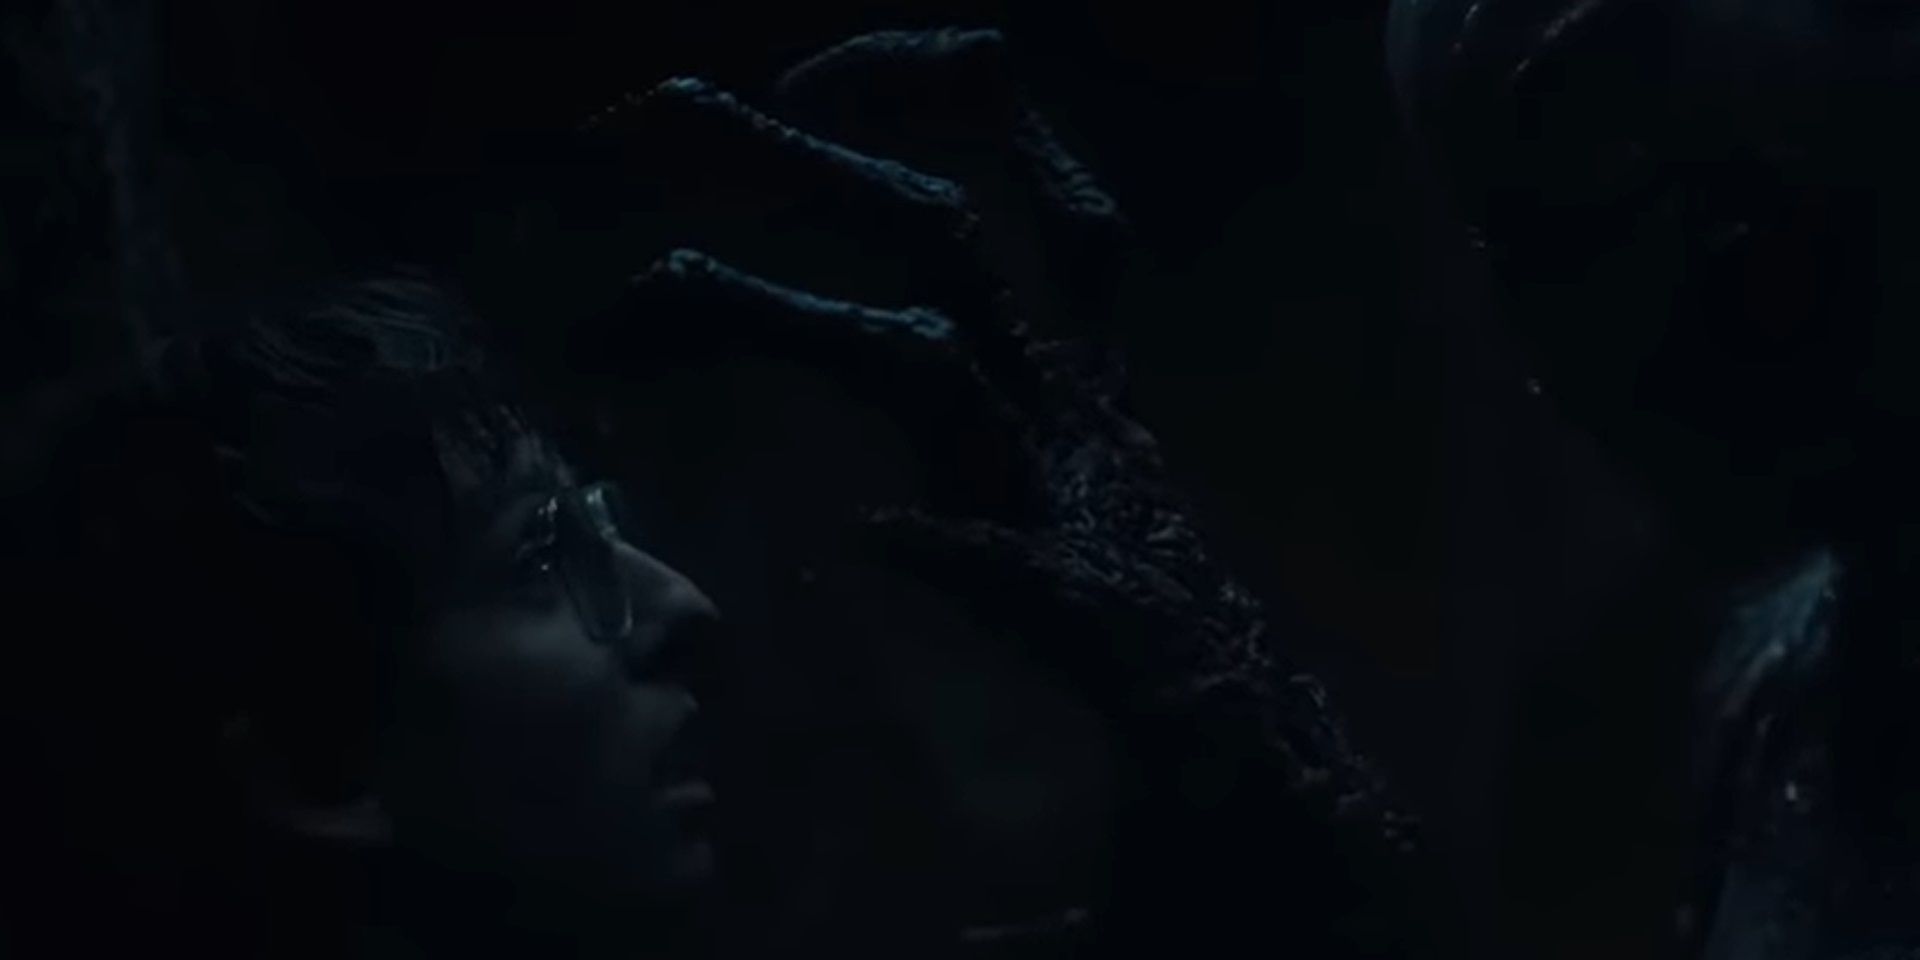  Fred and vecna in Netflix's Stranger Things